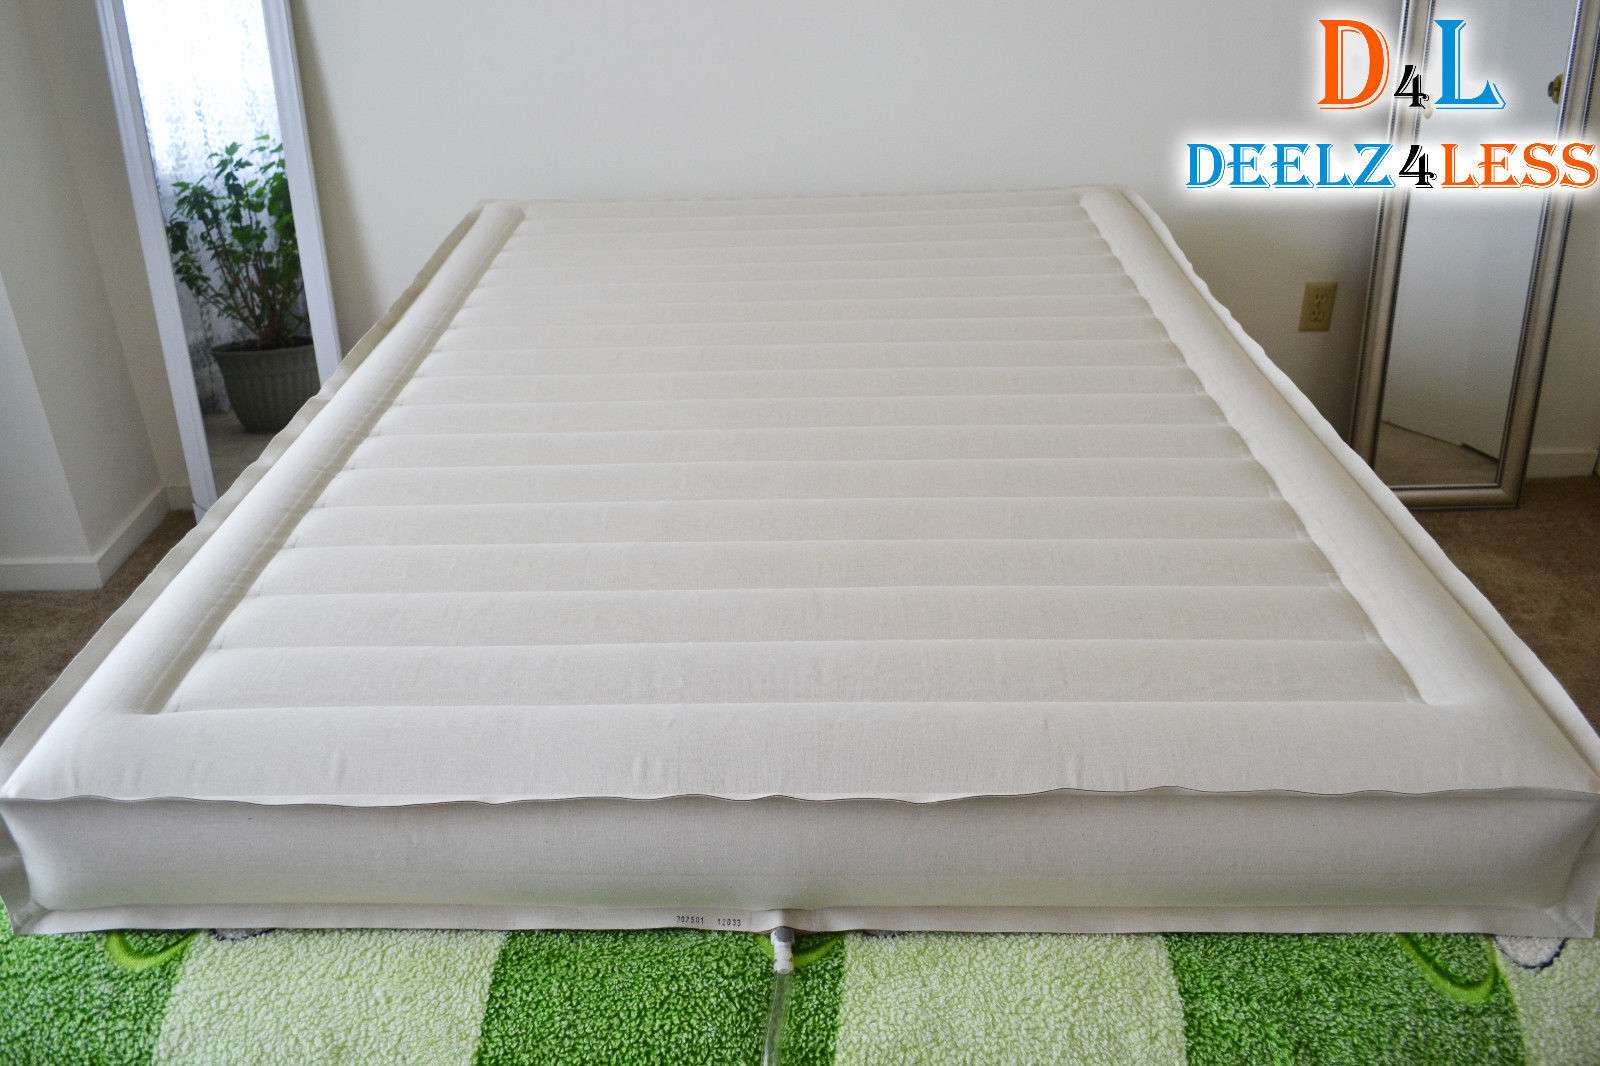 Select Comfort Sleep Number Queen Size Air Chamber for Single Hose Air ...